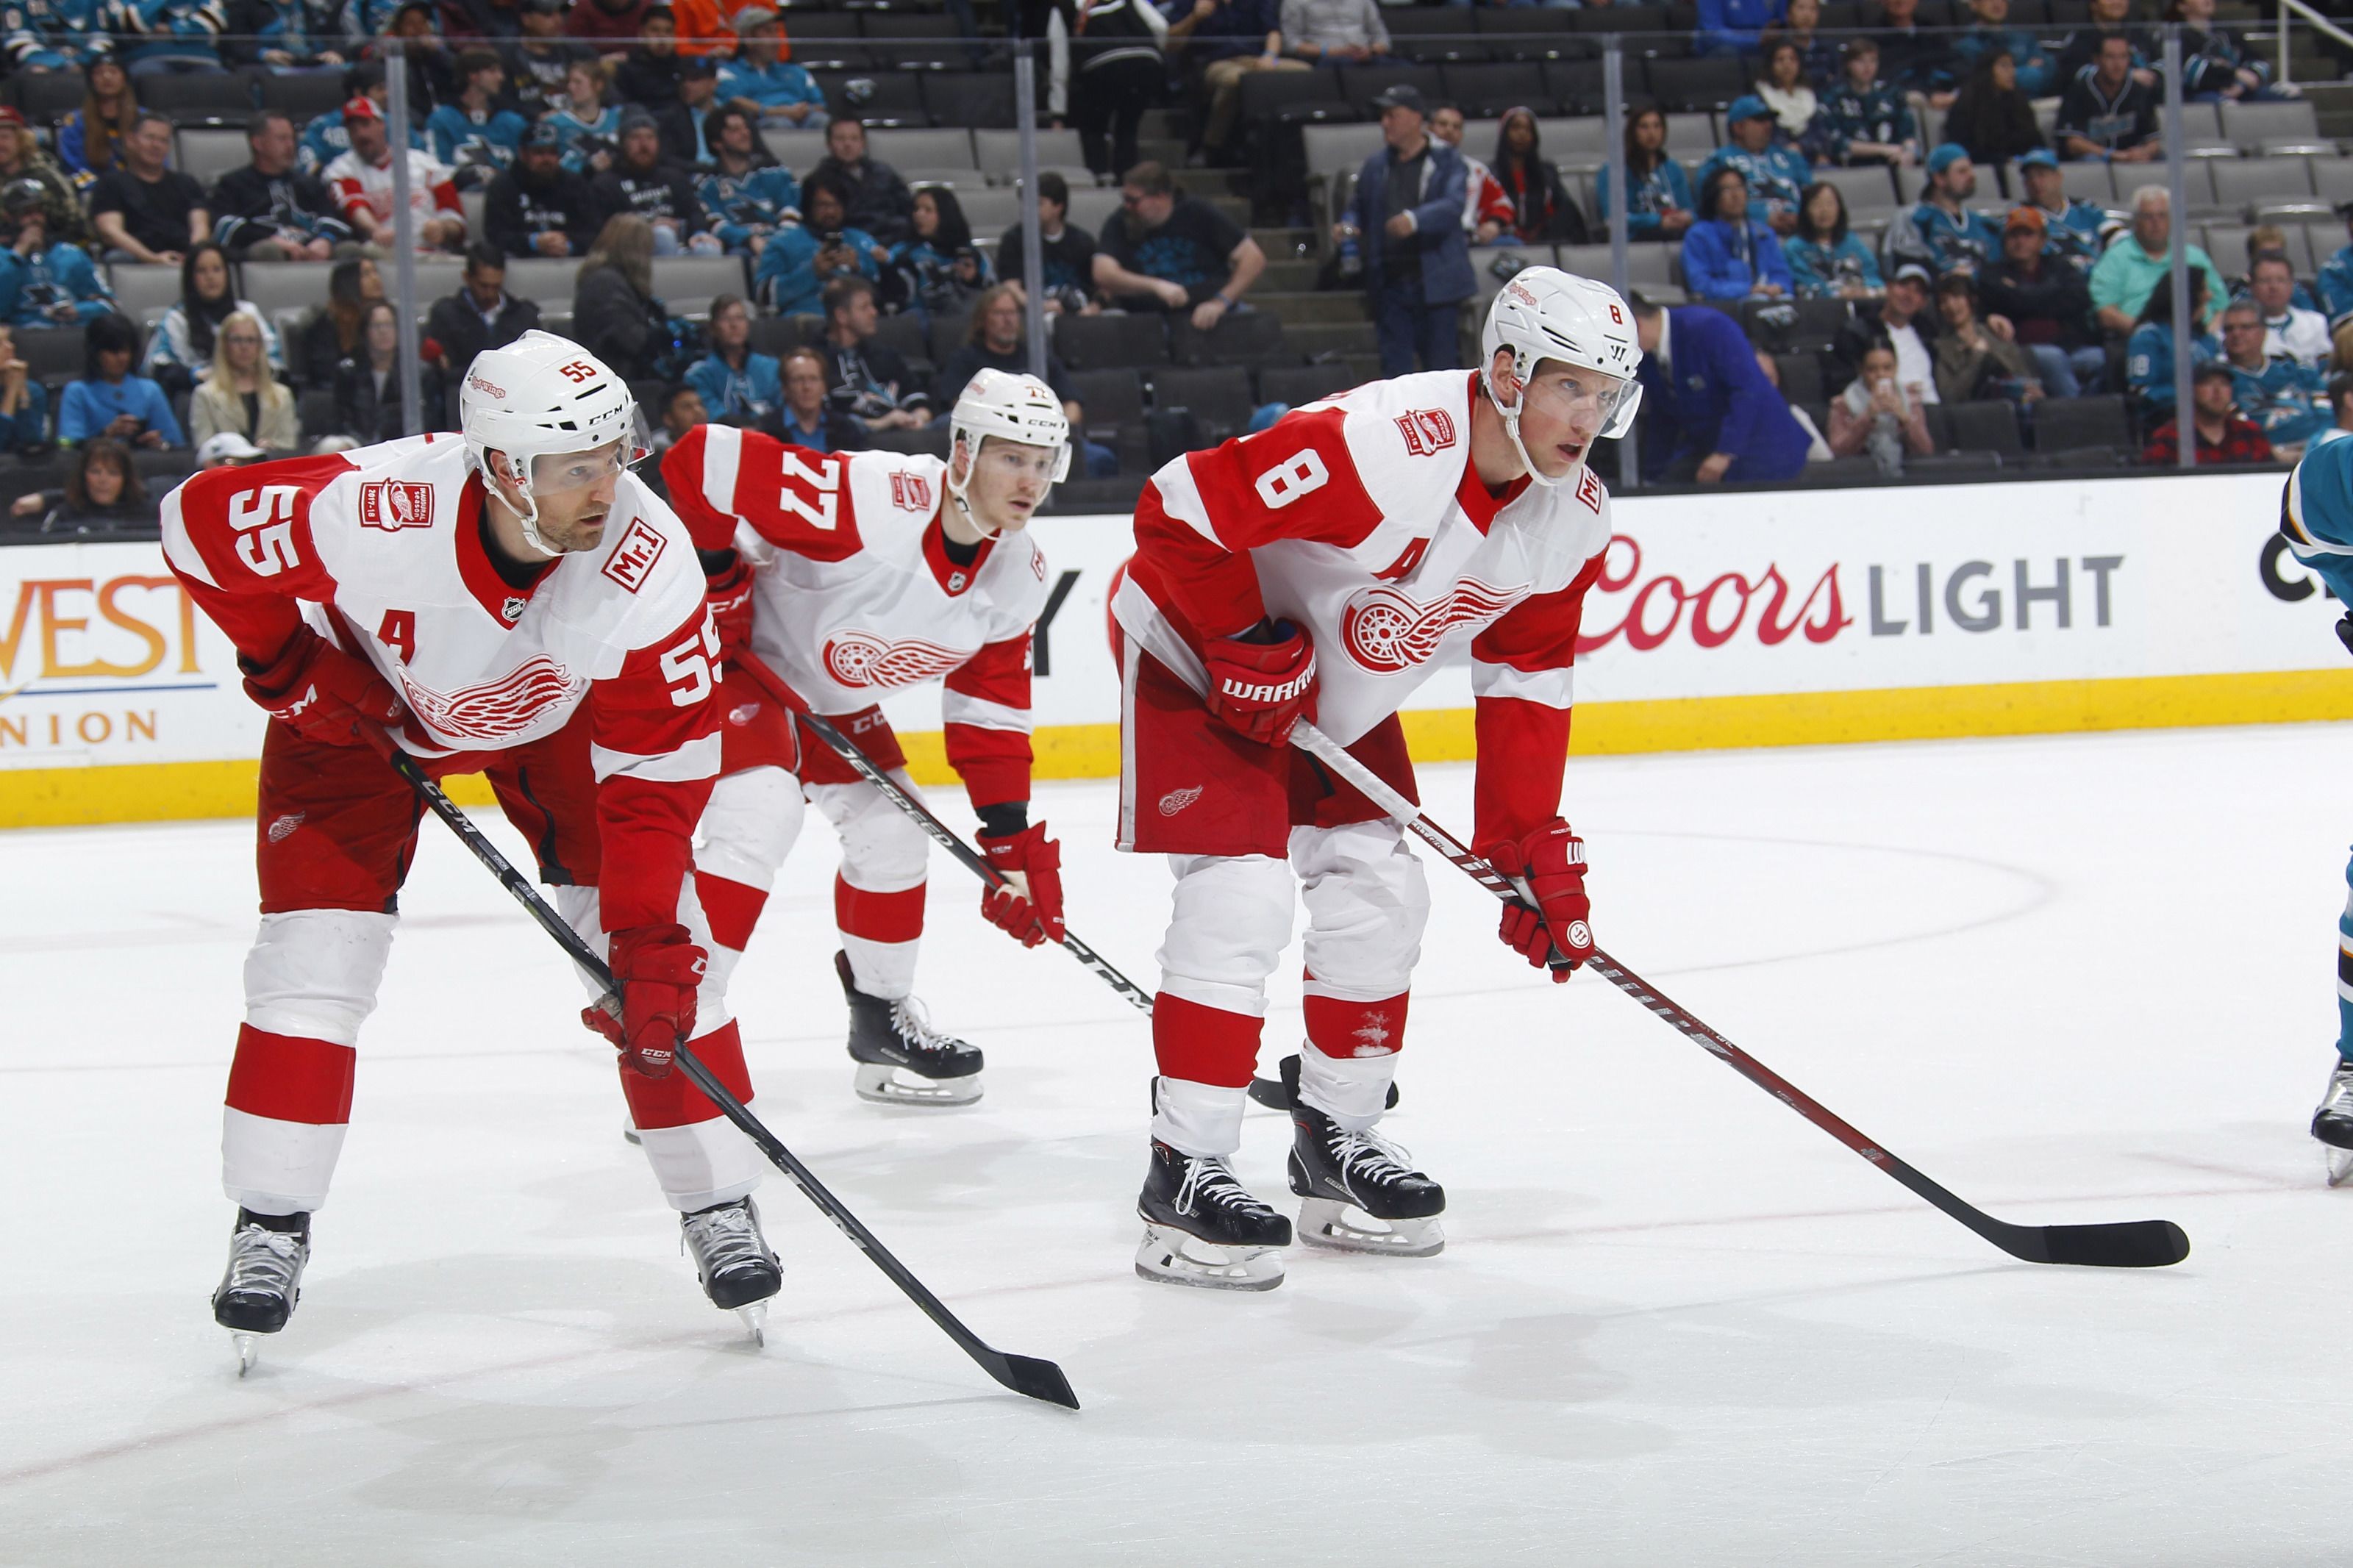 Detroit Red Wings Name Associate Captains for 2018/19